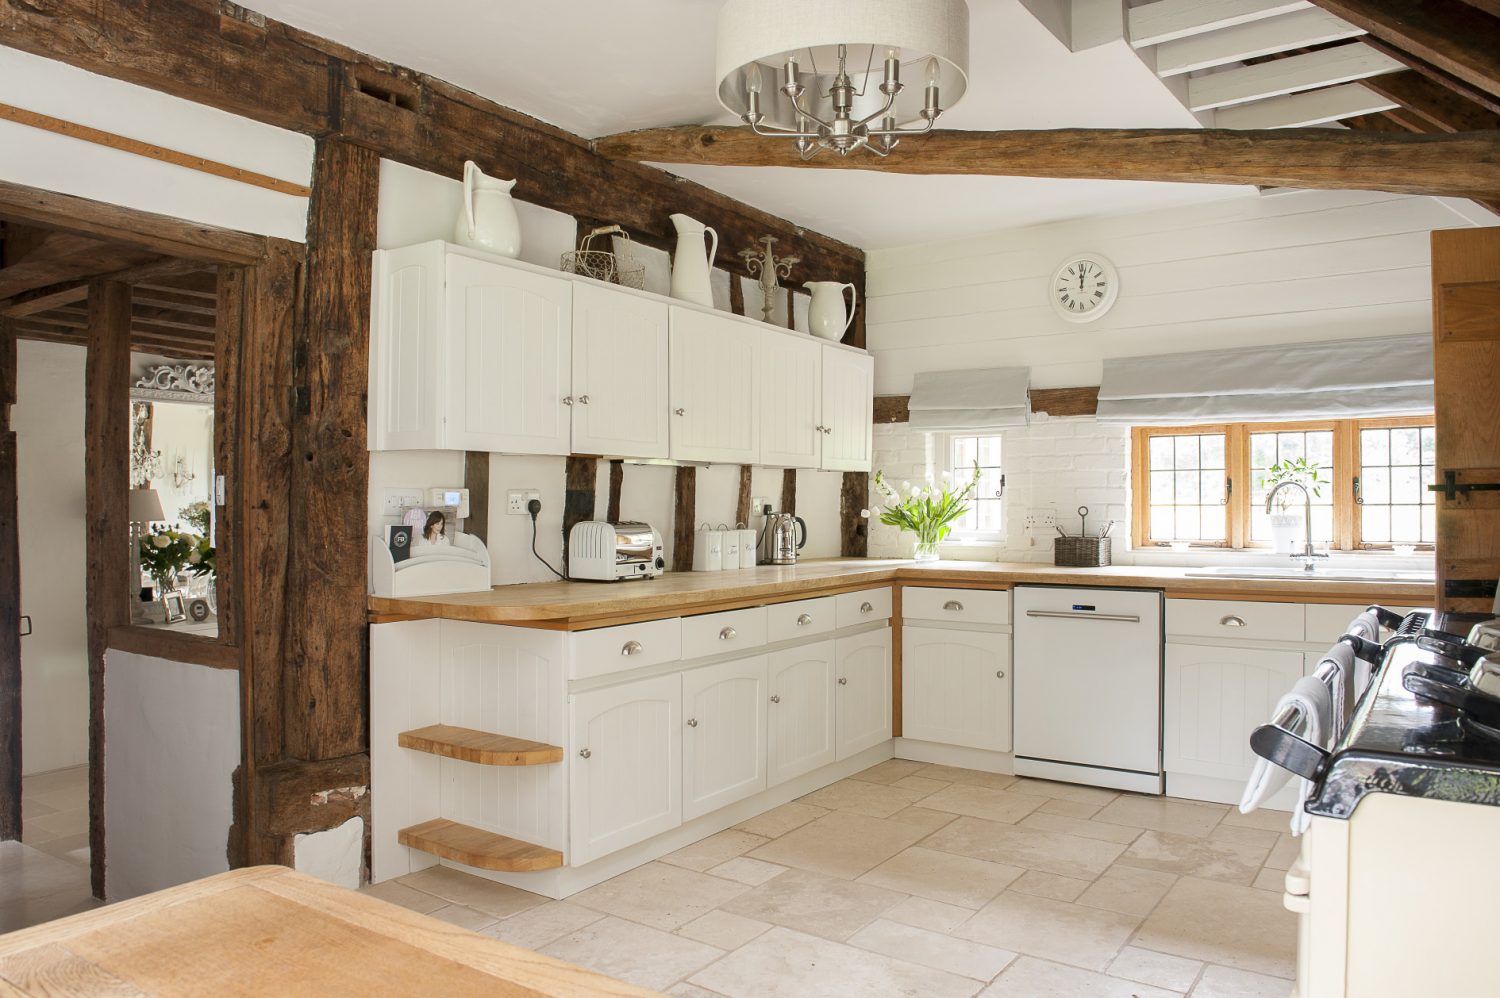 The modern, clean-white kitchen contrasts with the rustic beams and period features of this Wealden farmhouse